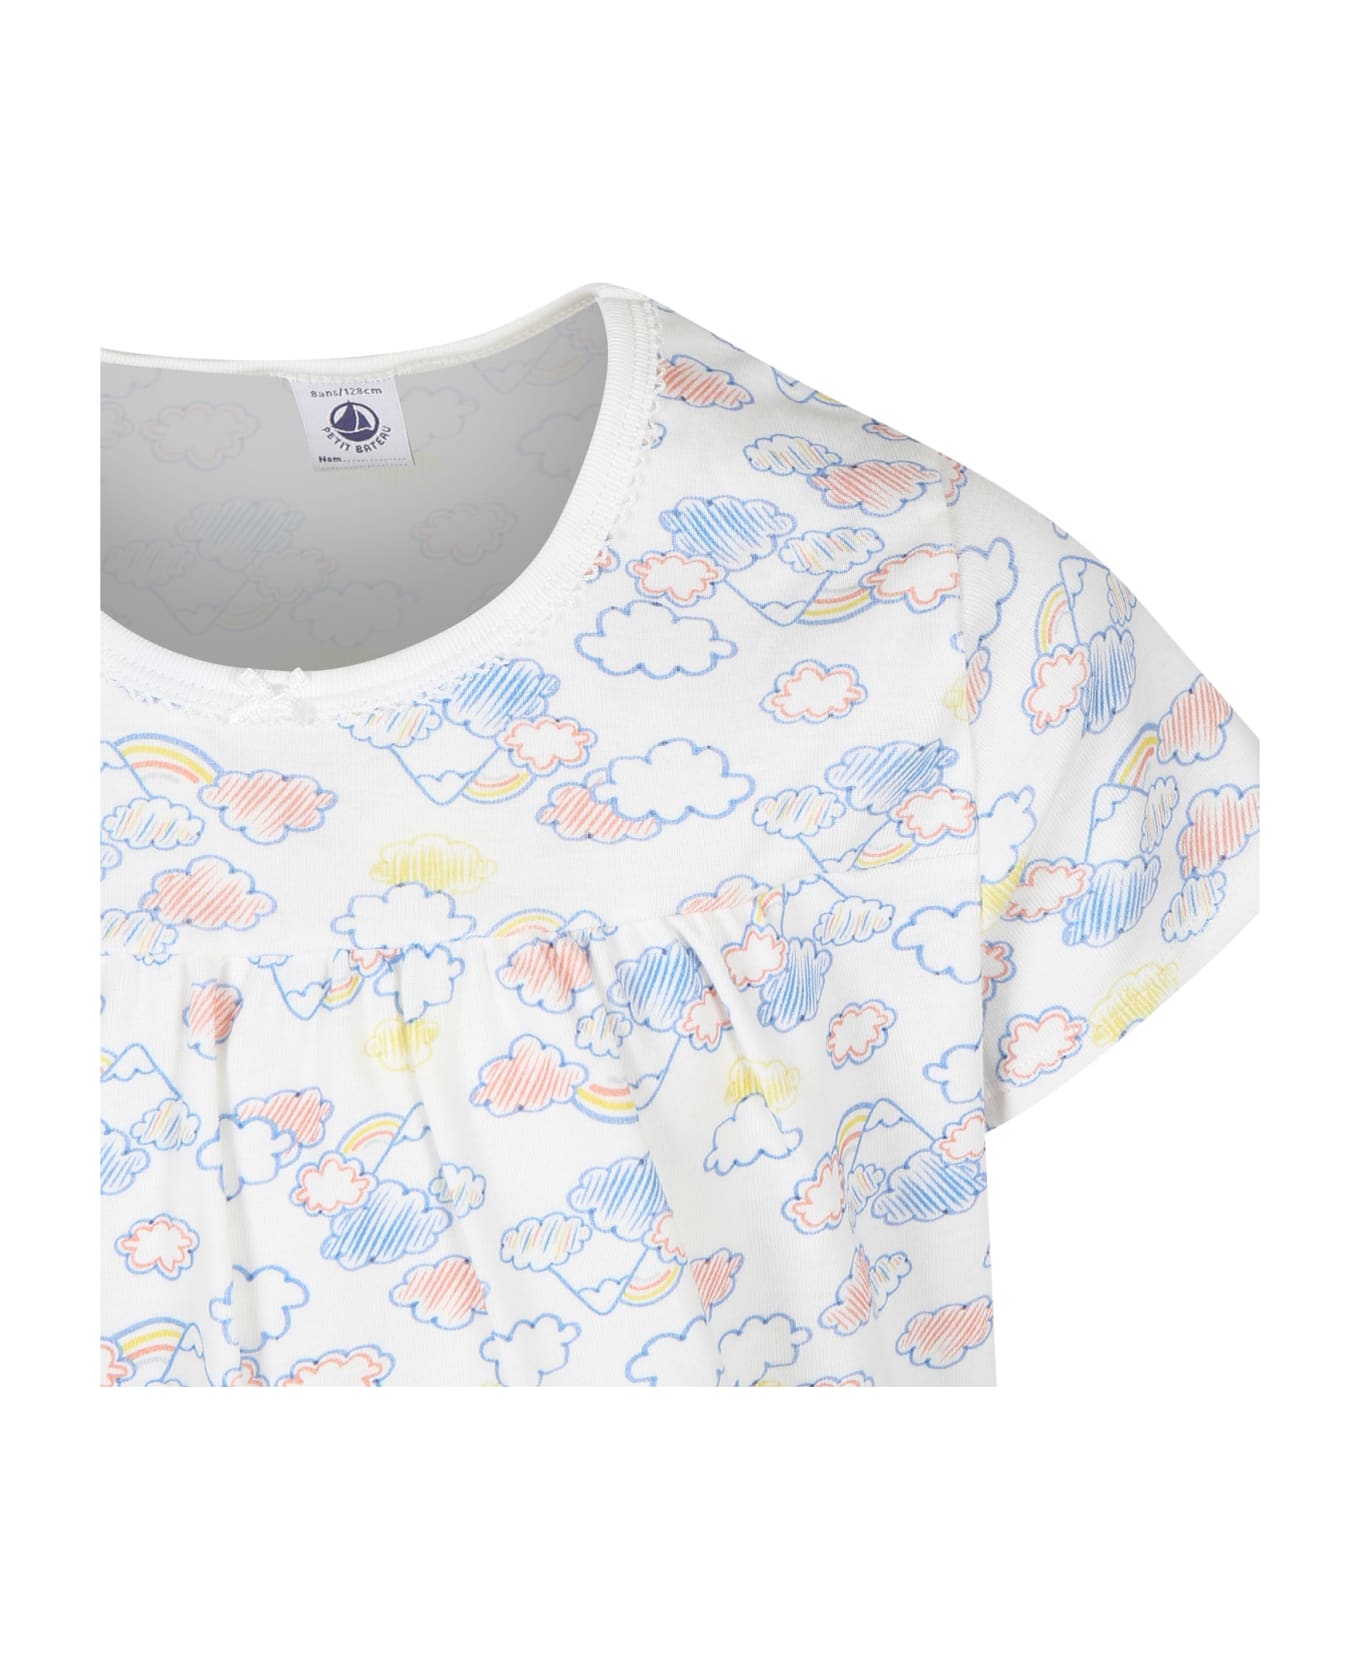 Petit Bateau White Pajamas For Girl With Clouds Print - White